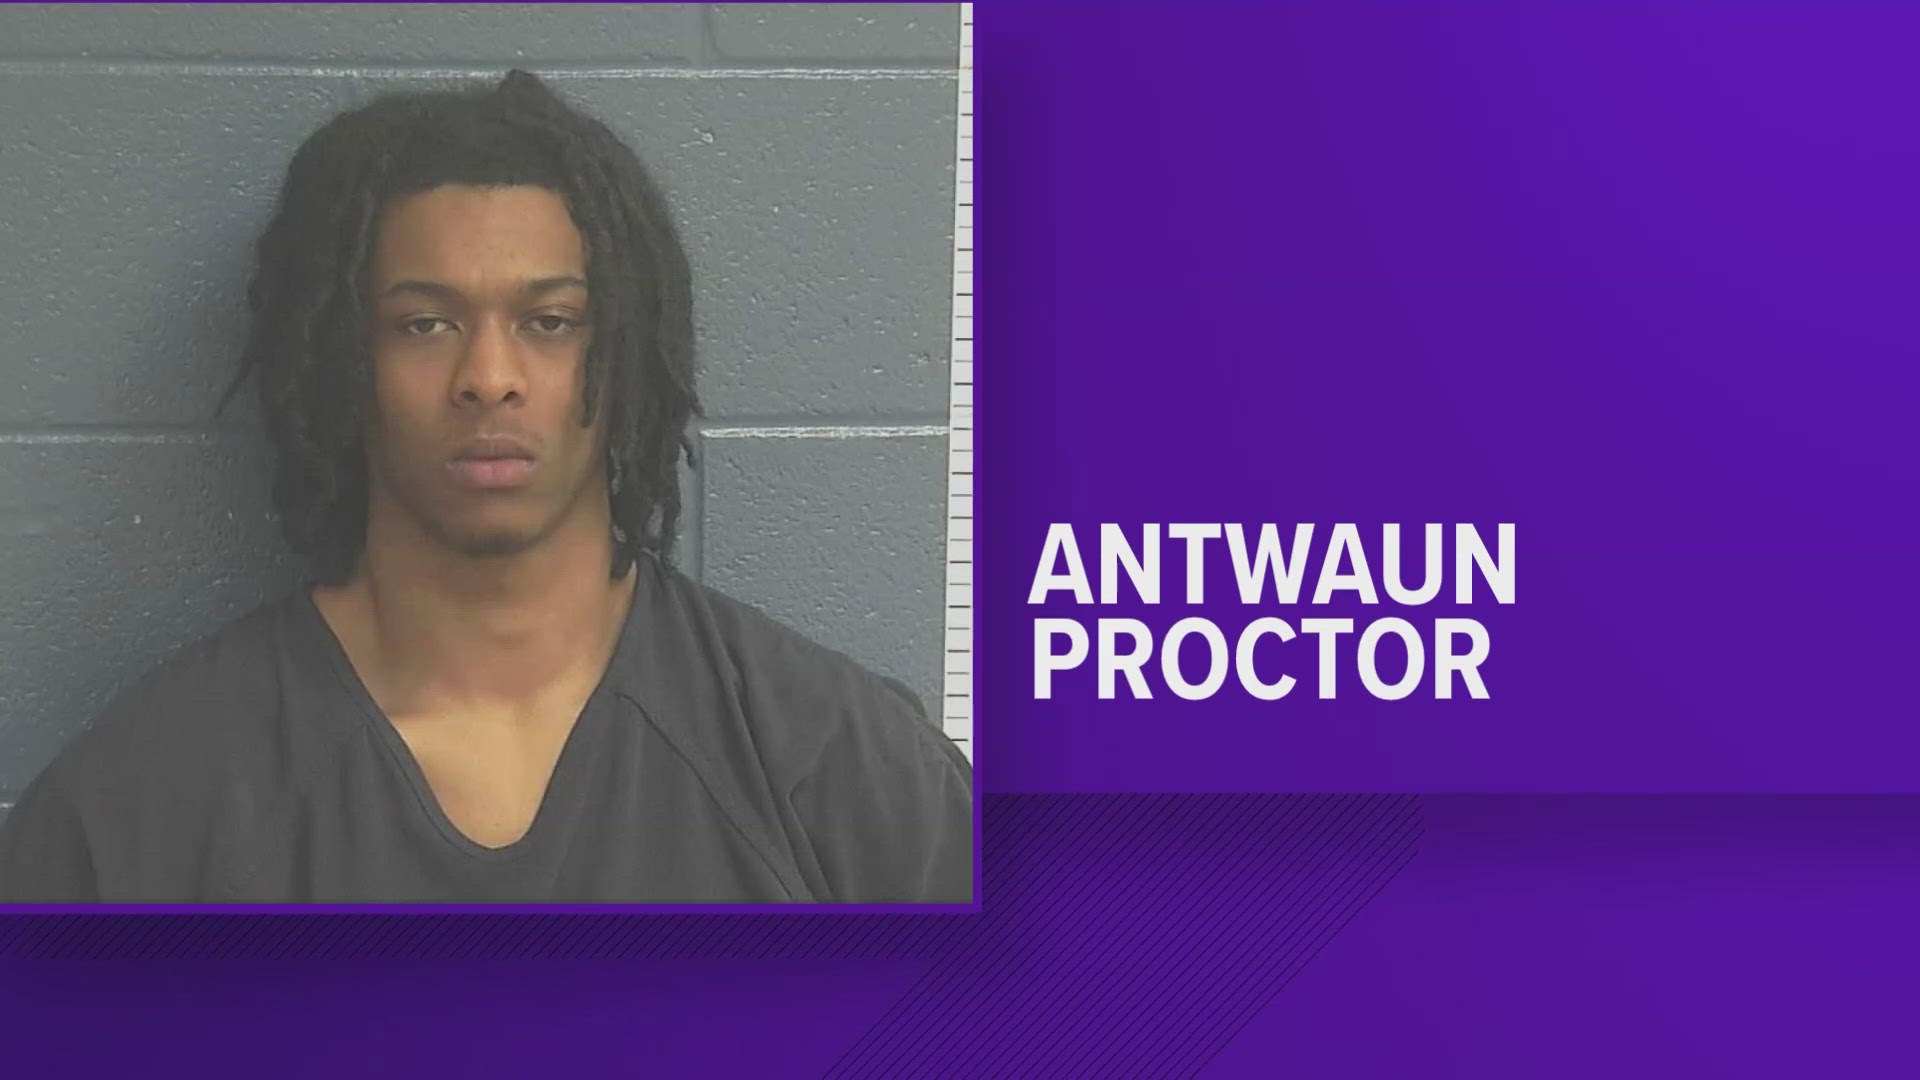 Antwaun Proctor, 20, is charged with murder, robbery, criminal mischief and recklessness with a firearm.